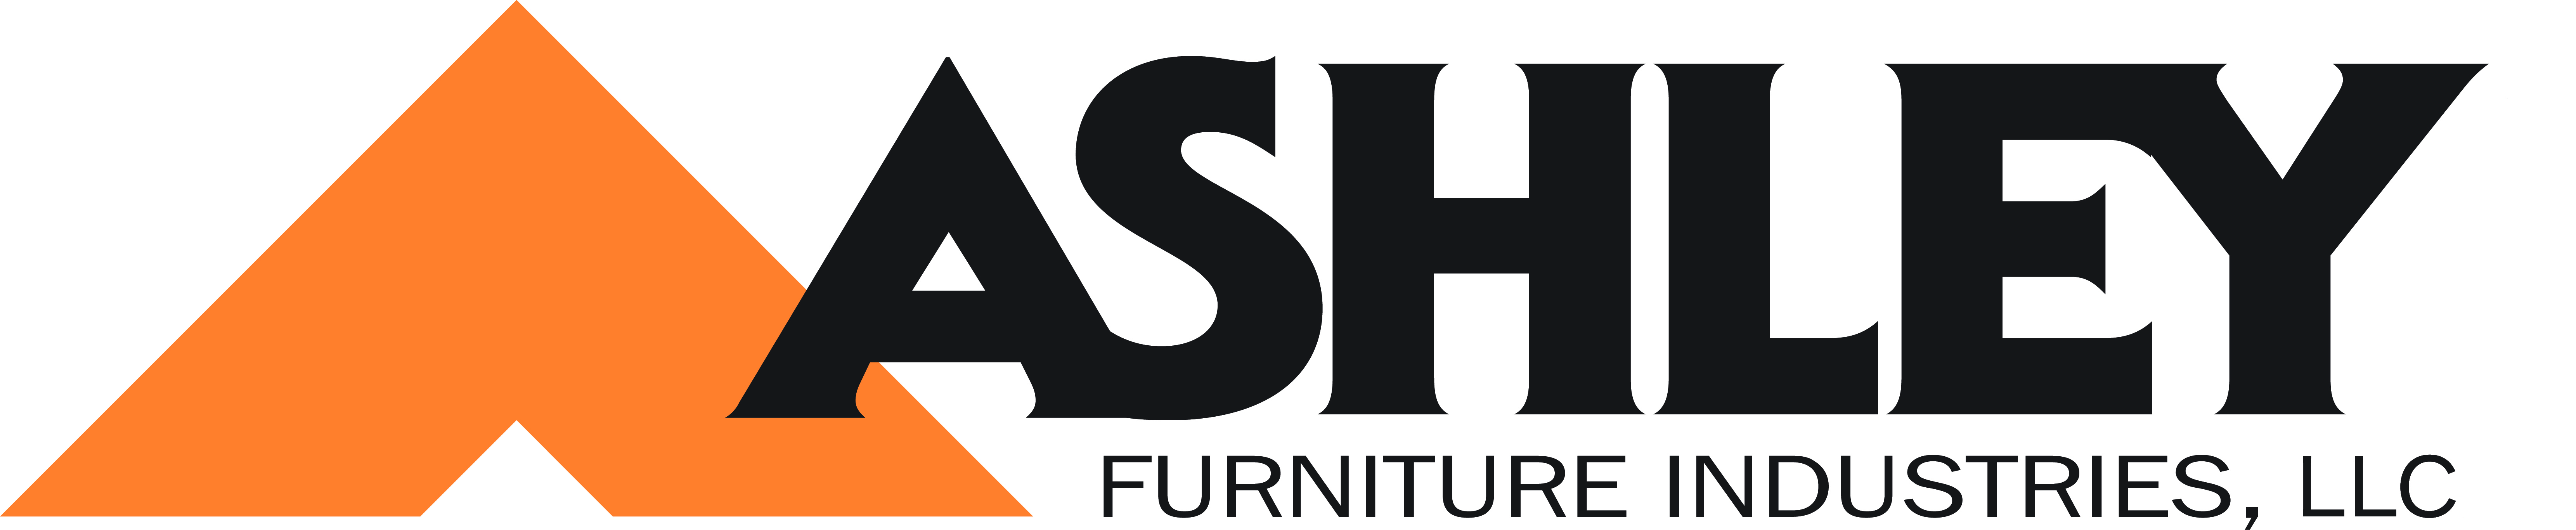 Ashley Furniture Industries Named One of America's Best